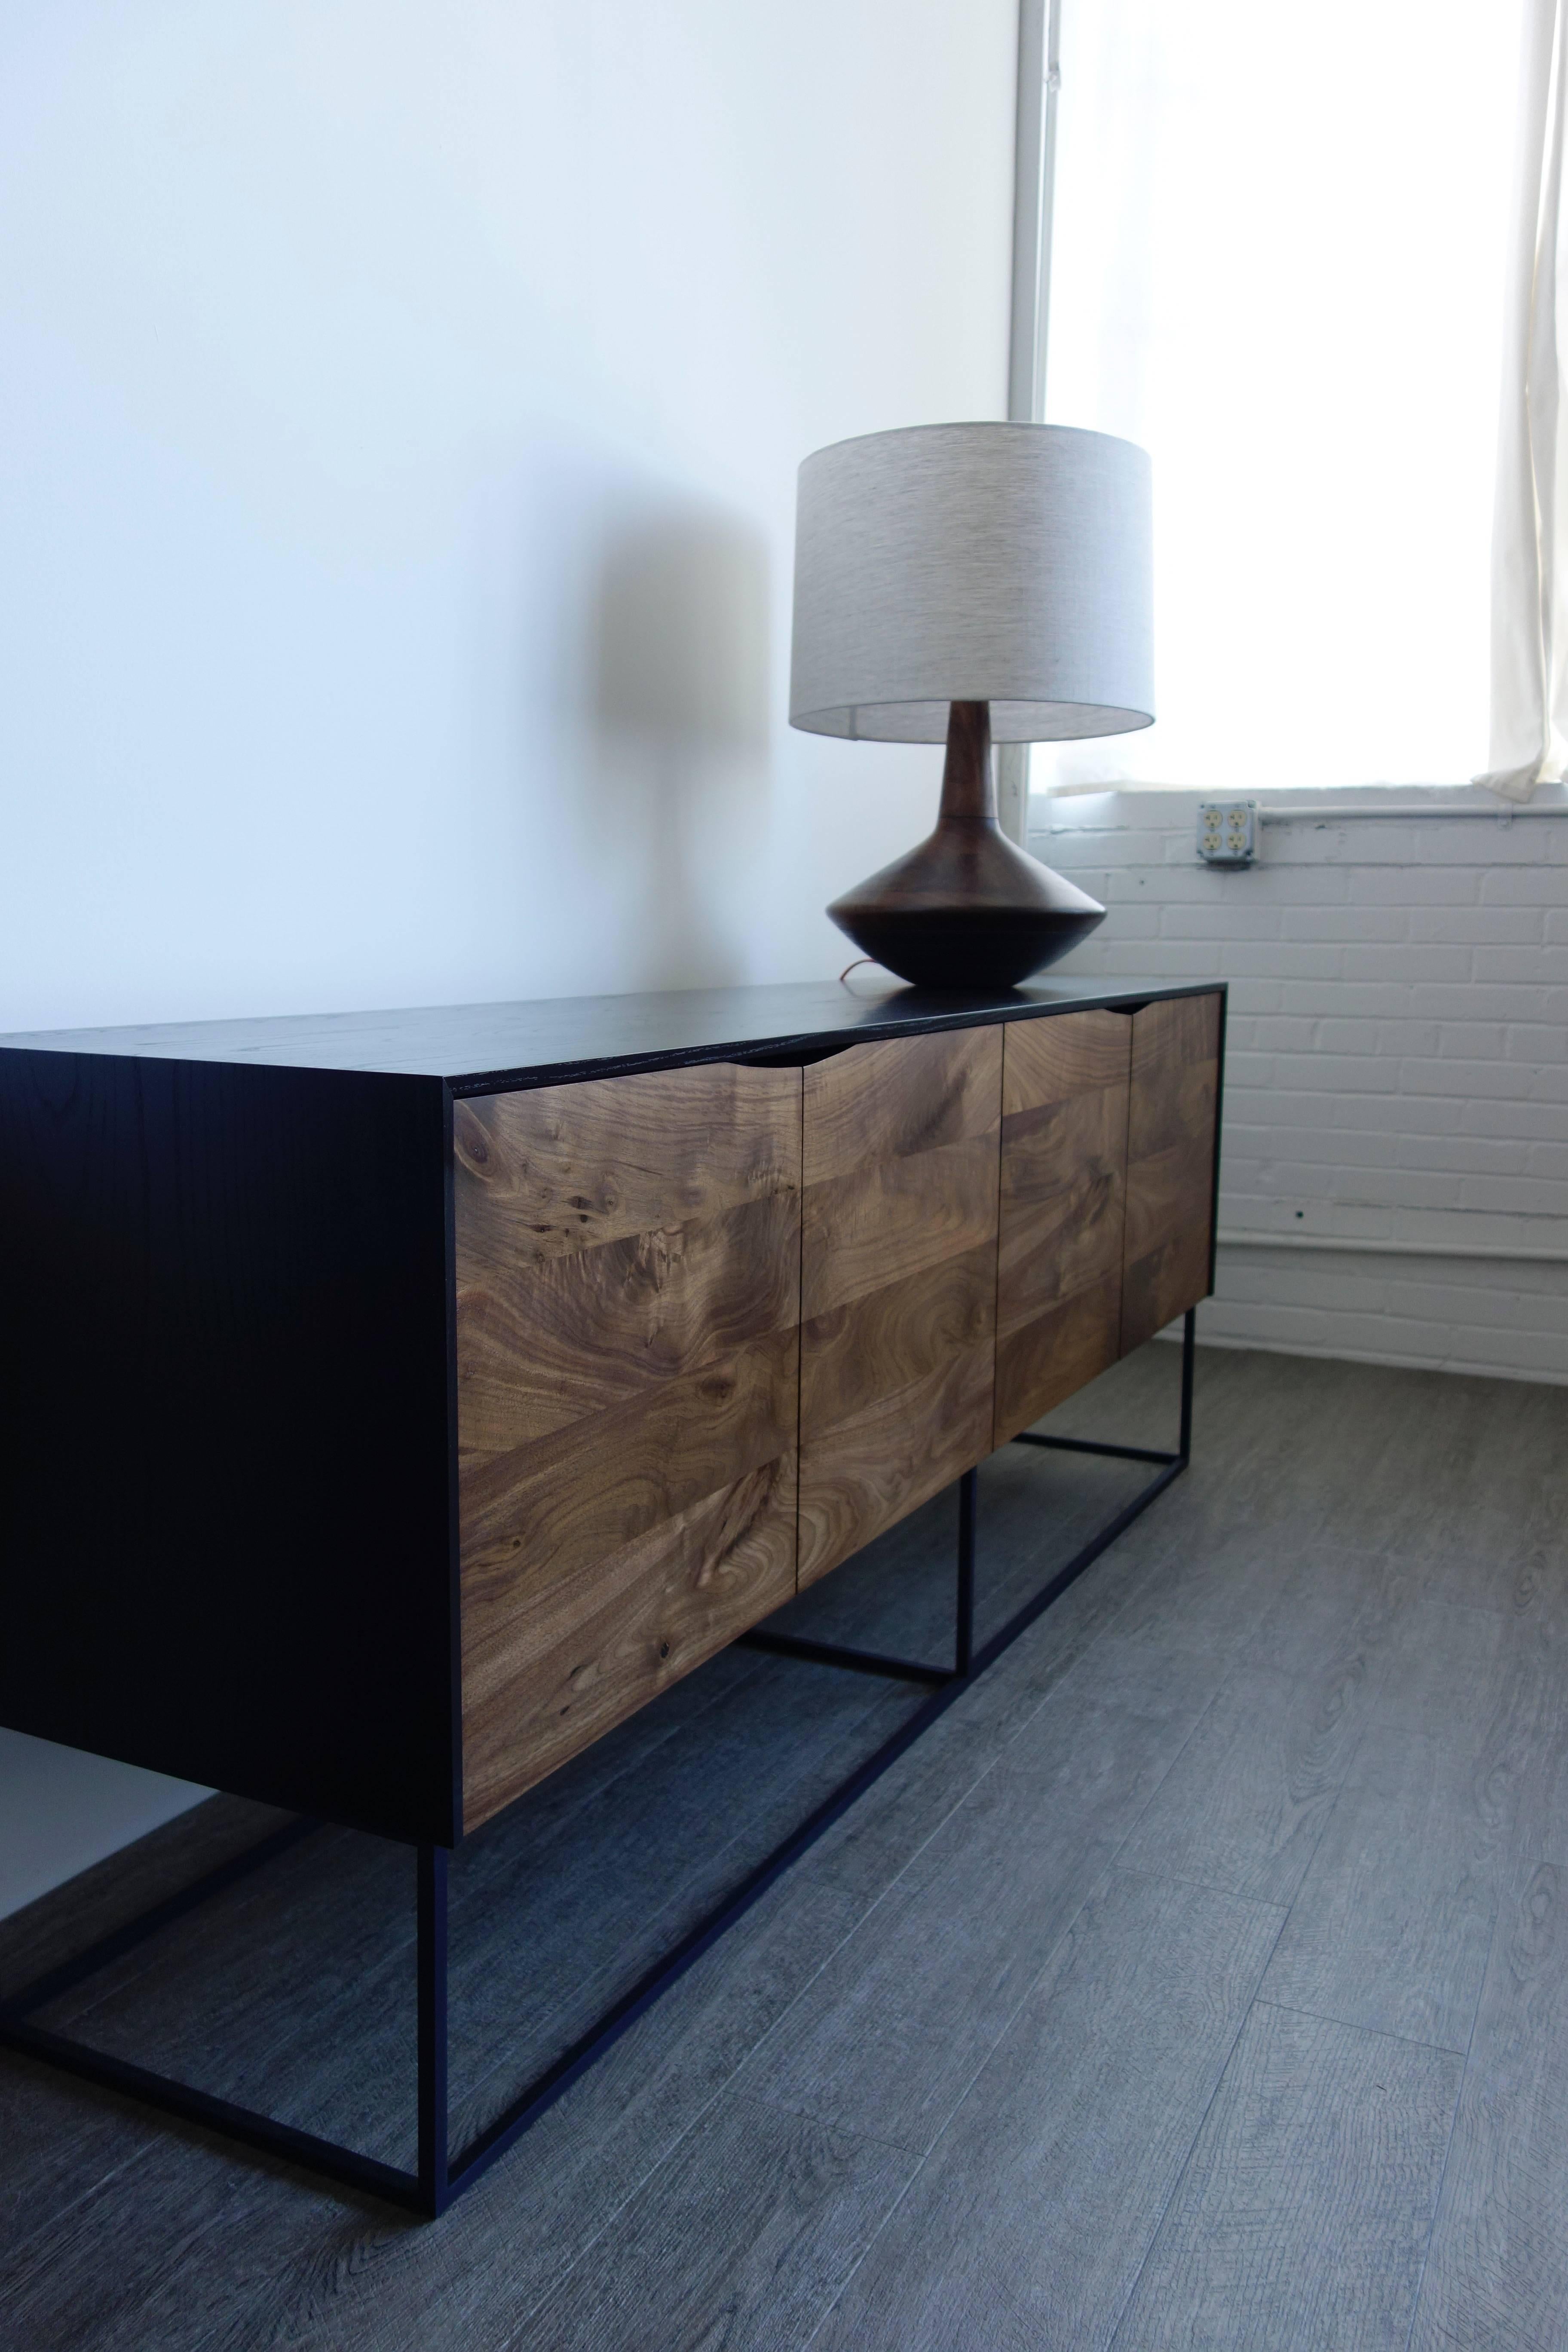 Handcrafted classic modern credenza of ebonized ash and walnut with a cold-rolled steel base. The exterior is ebonized and coated with a durable lacquer; the interior is coated with a proprietary deep blue colored lacquer. The soft-close walnut